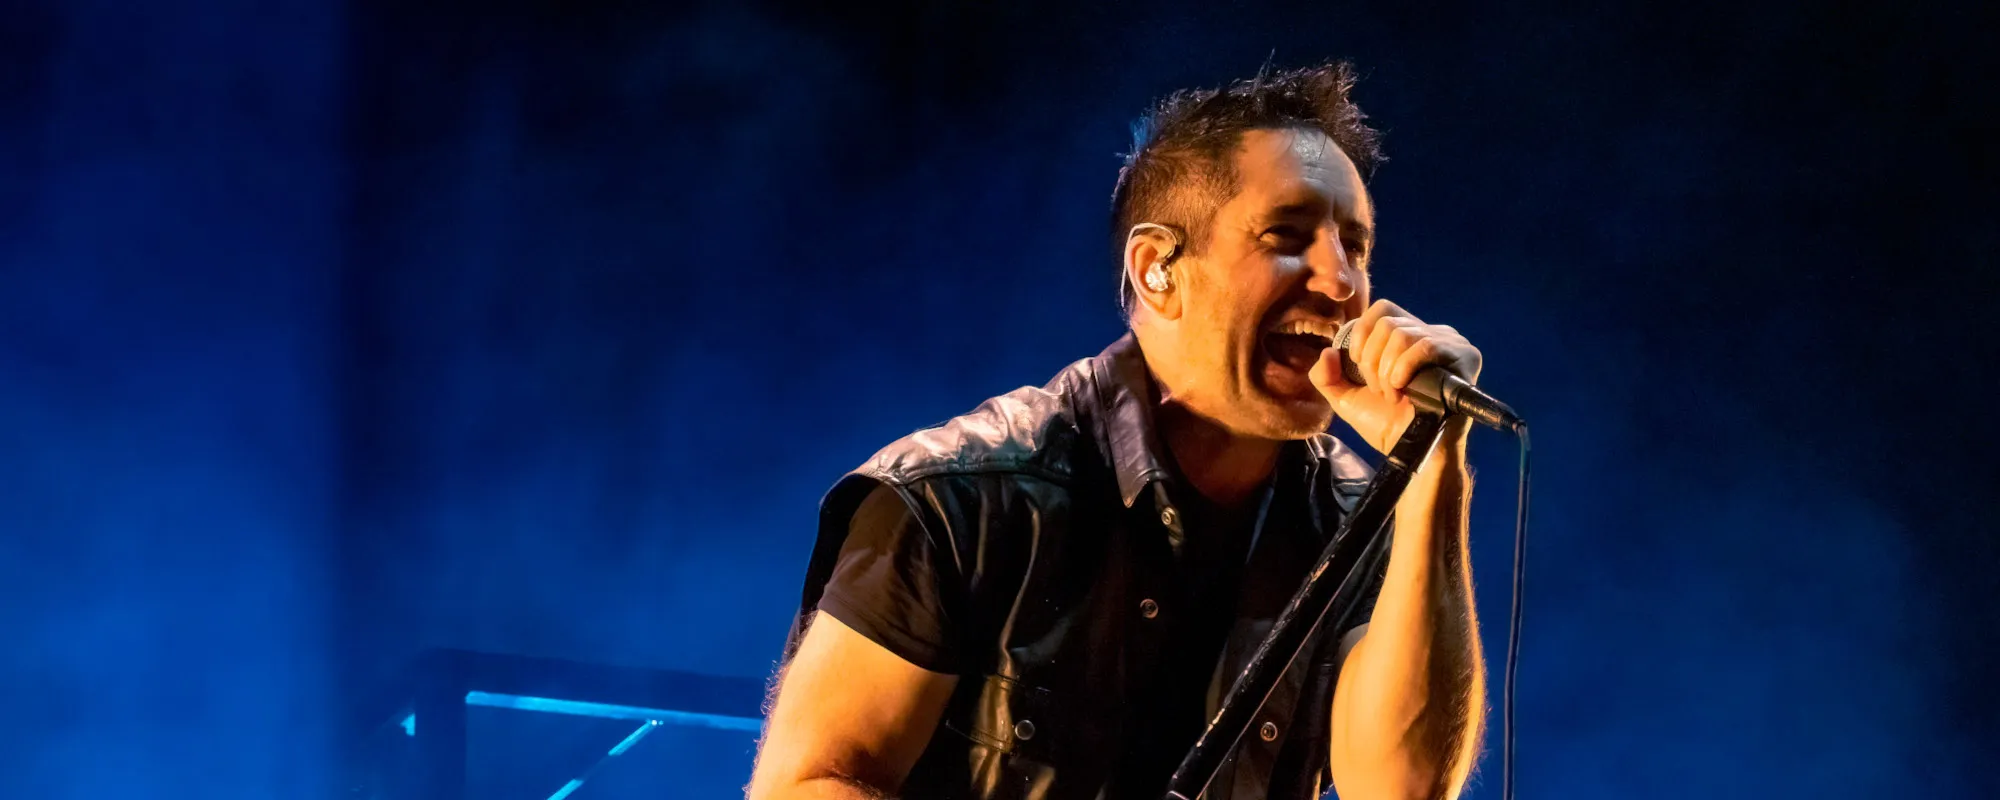 Trent Reznor Not Interested in Touring Anytime Soon: “I Don’t Want to be Away From My Kids”